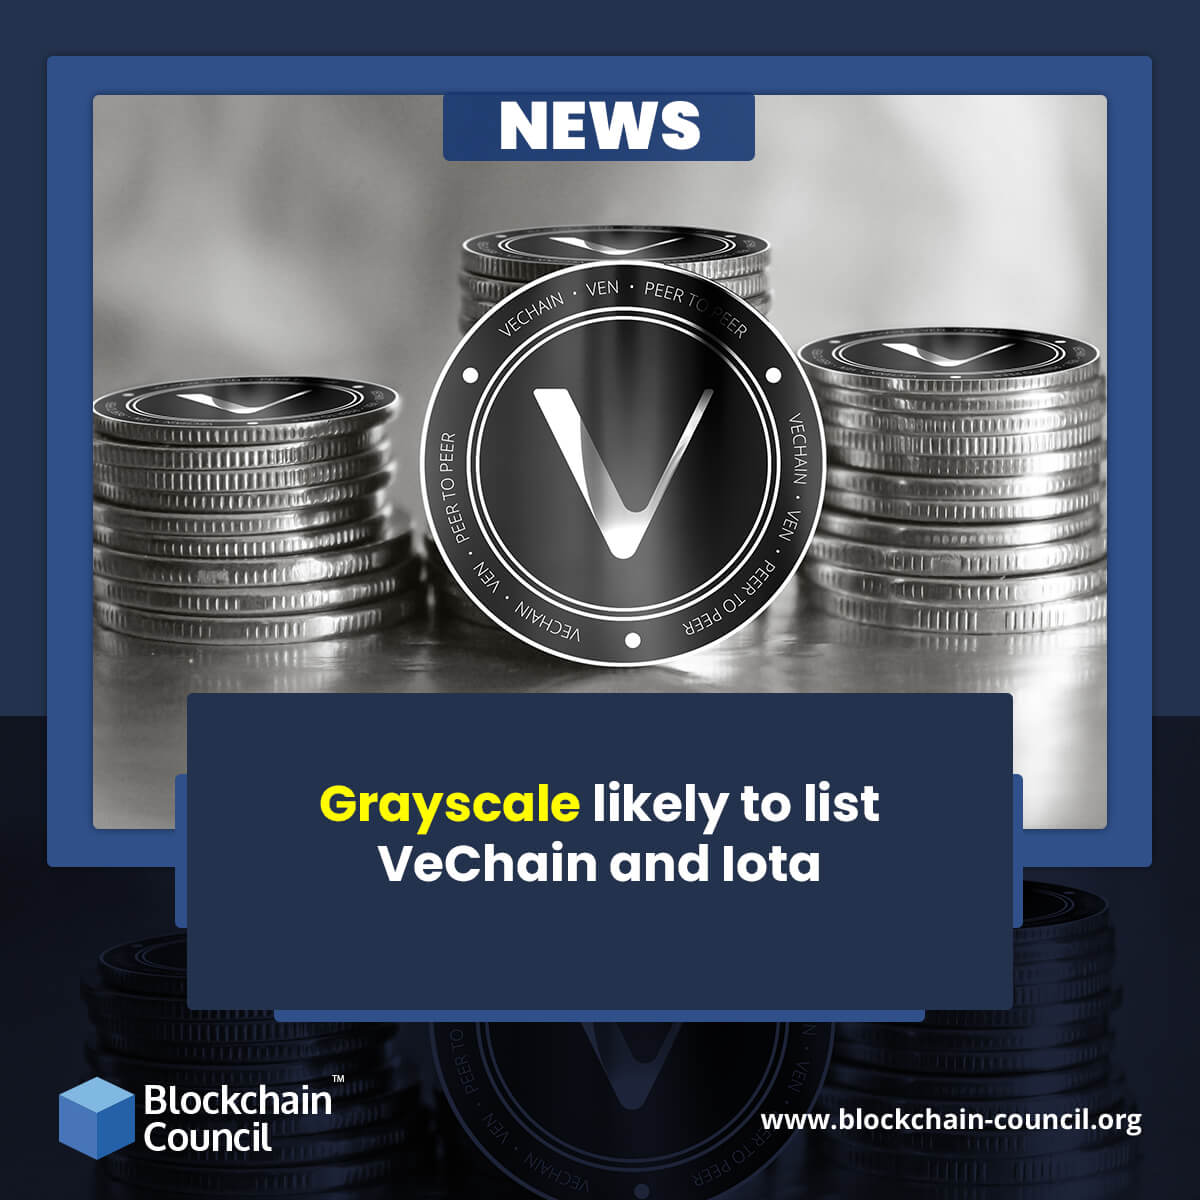 Grayscale likely to list VeChain and Iota